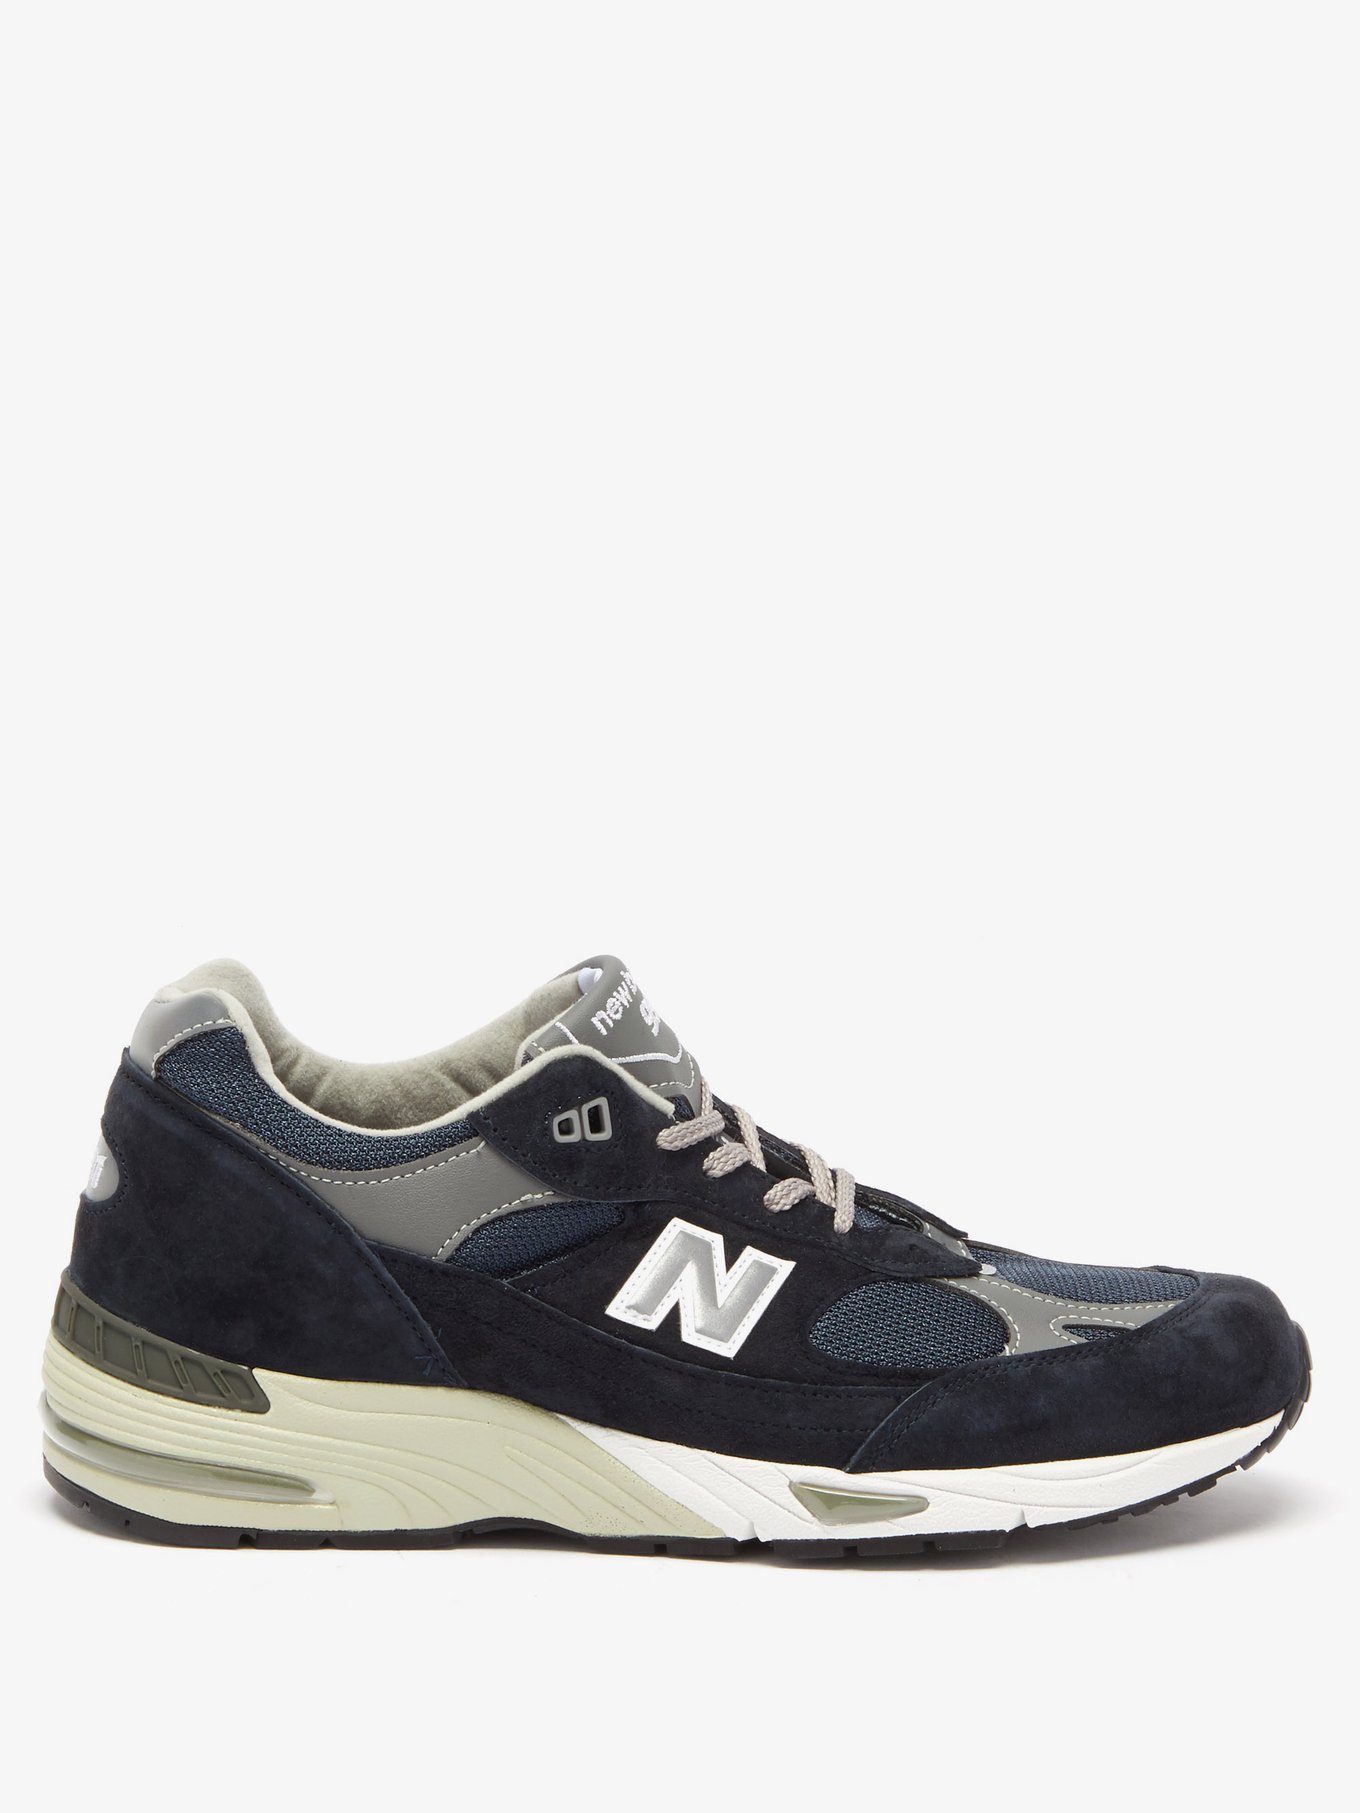 Made in UK 991 suede and mesh trainers | New Balance